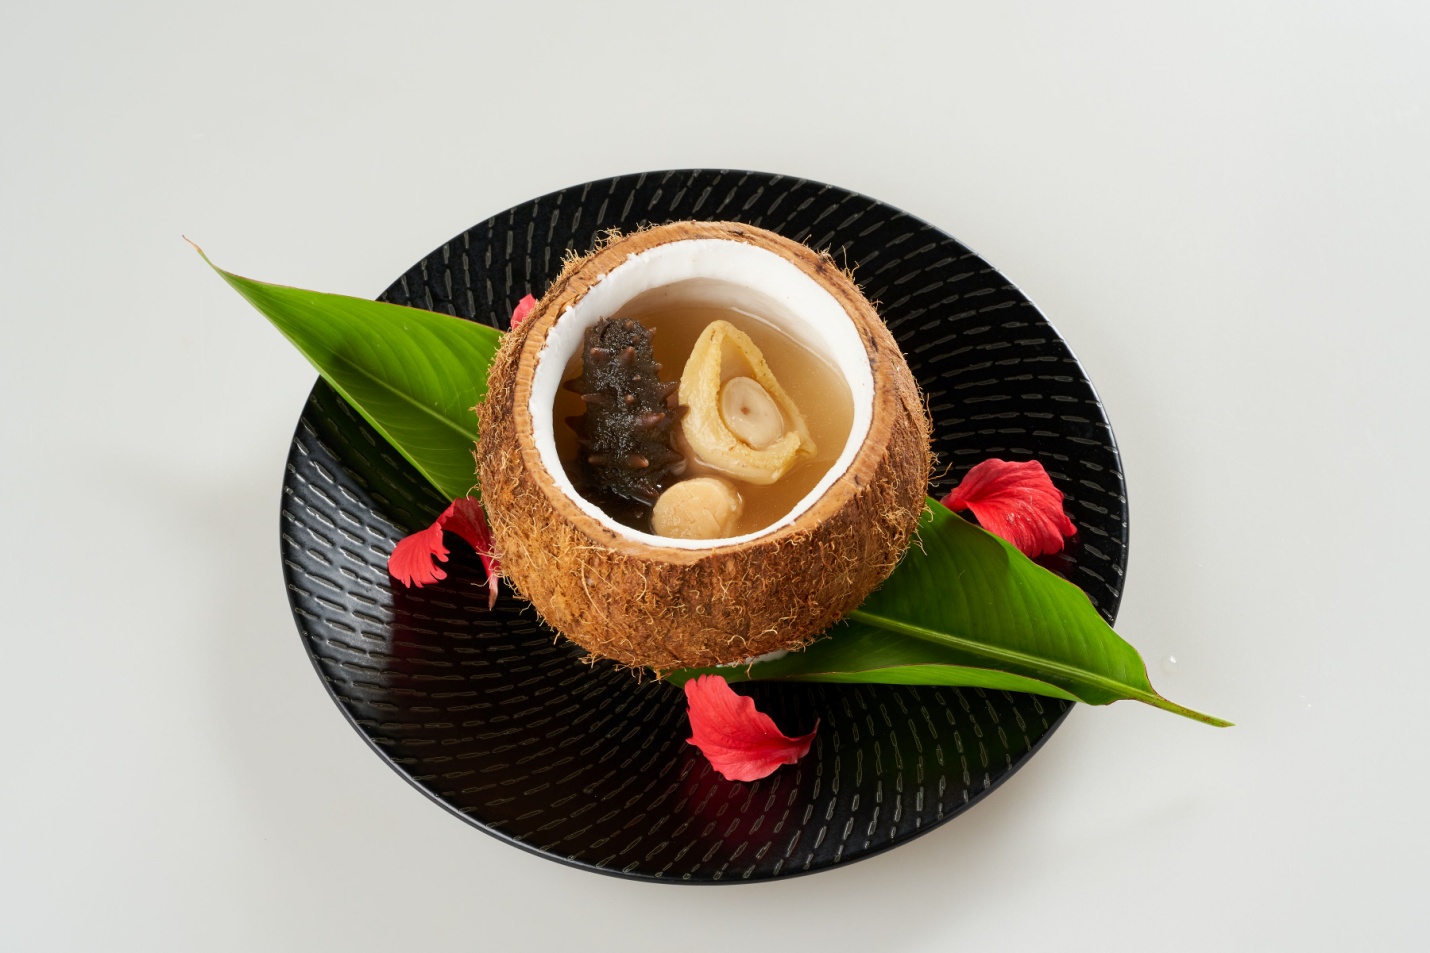 C:\Users\GCPI-ROBBY\Desktop\PRS\WHIMSICAL SELECTIONS AT TEA OF SPRING\Soup- Double-boiled Abalone and Dried Scallop served in a Coconut Shell.png